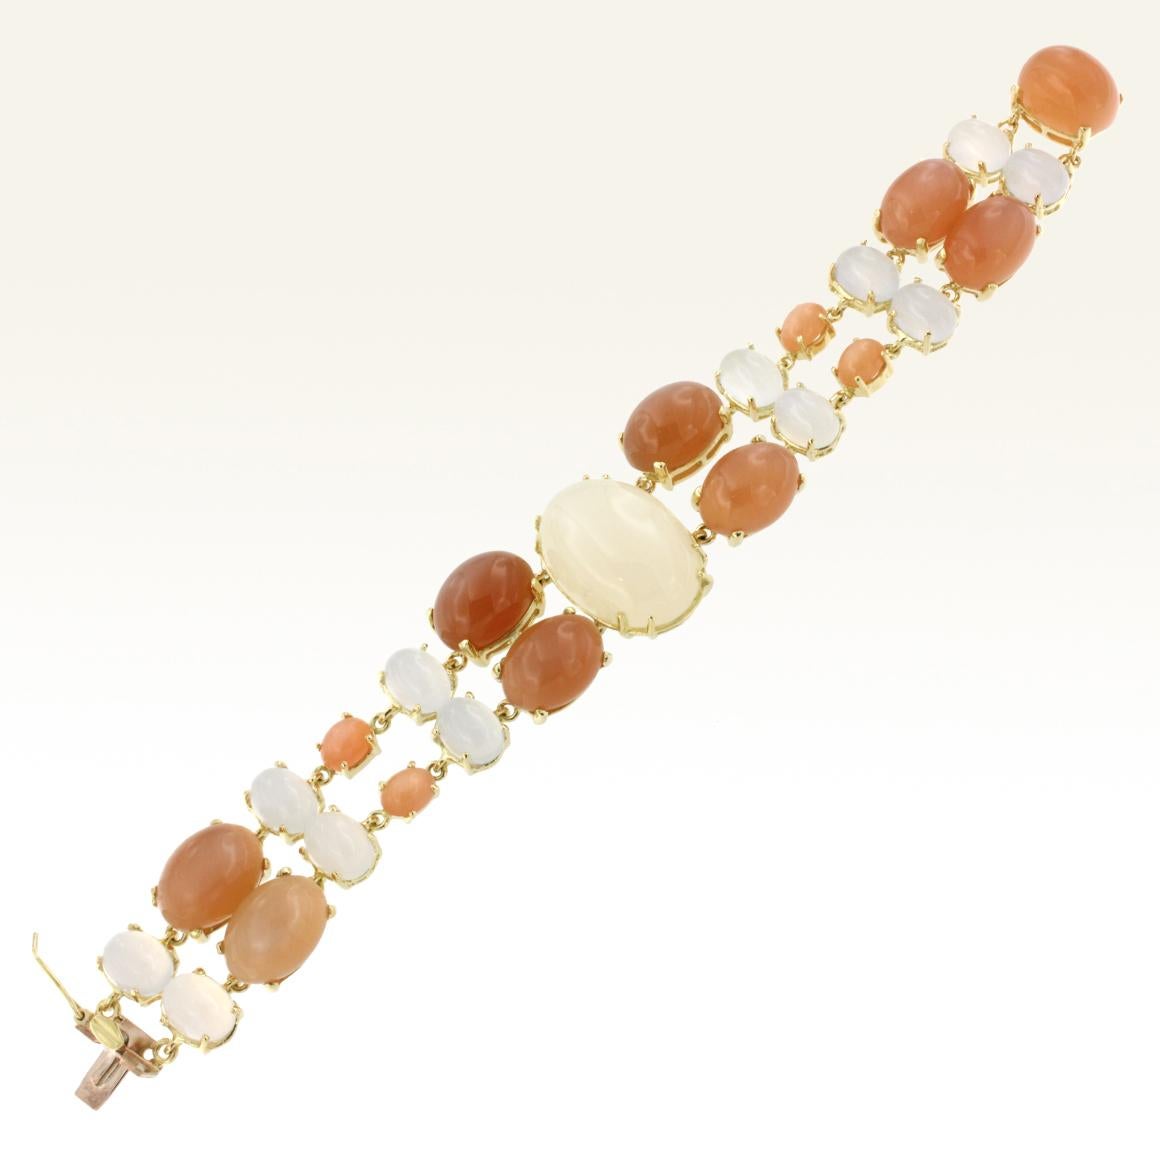 Modern Bracelet in 18 Karat yellow gold with White Moonstone (size: 16x23 mm), Peach Moonstone (size:  10x14 mm small 5x7) and Chalcedony mm 6x8 oval.  Total weight g.55.10
Very trendy and pretty  bracelet by Stanoppi Jewellery . The combination of